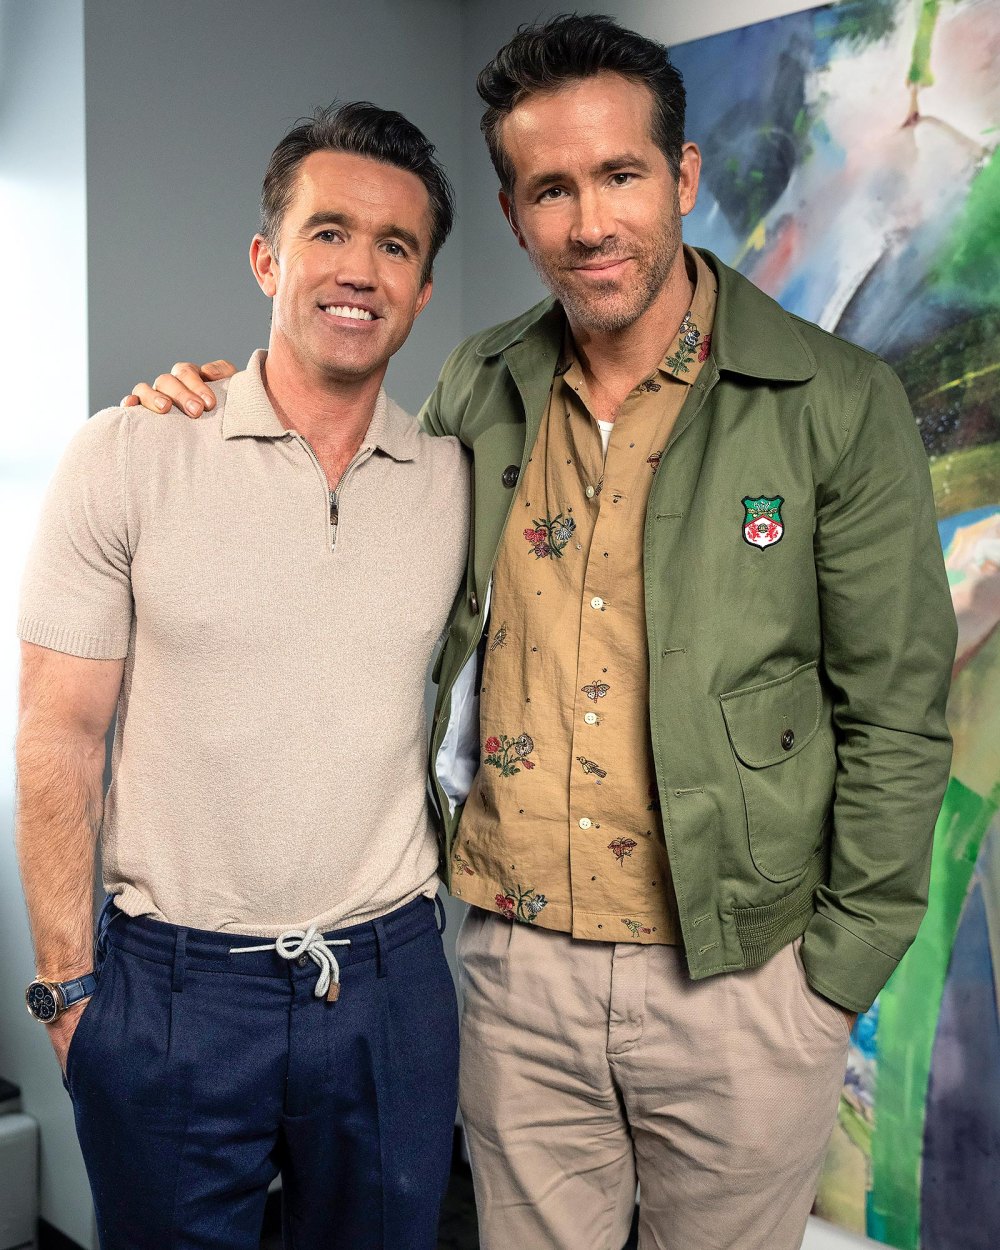 Ryan Reynolds and Rob McElhenney Buy Another Soccer Team After the Ongoing Success of Wrexham AFC